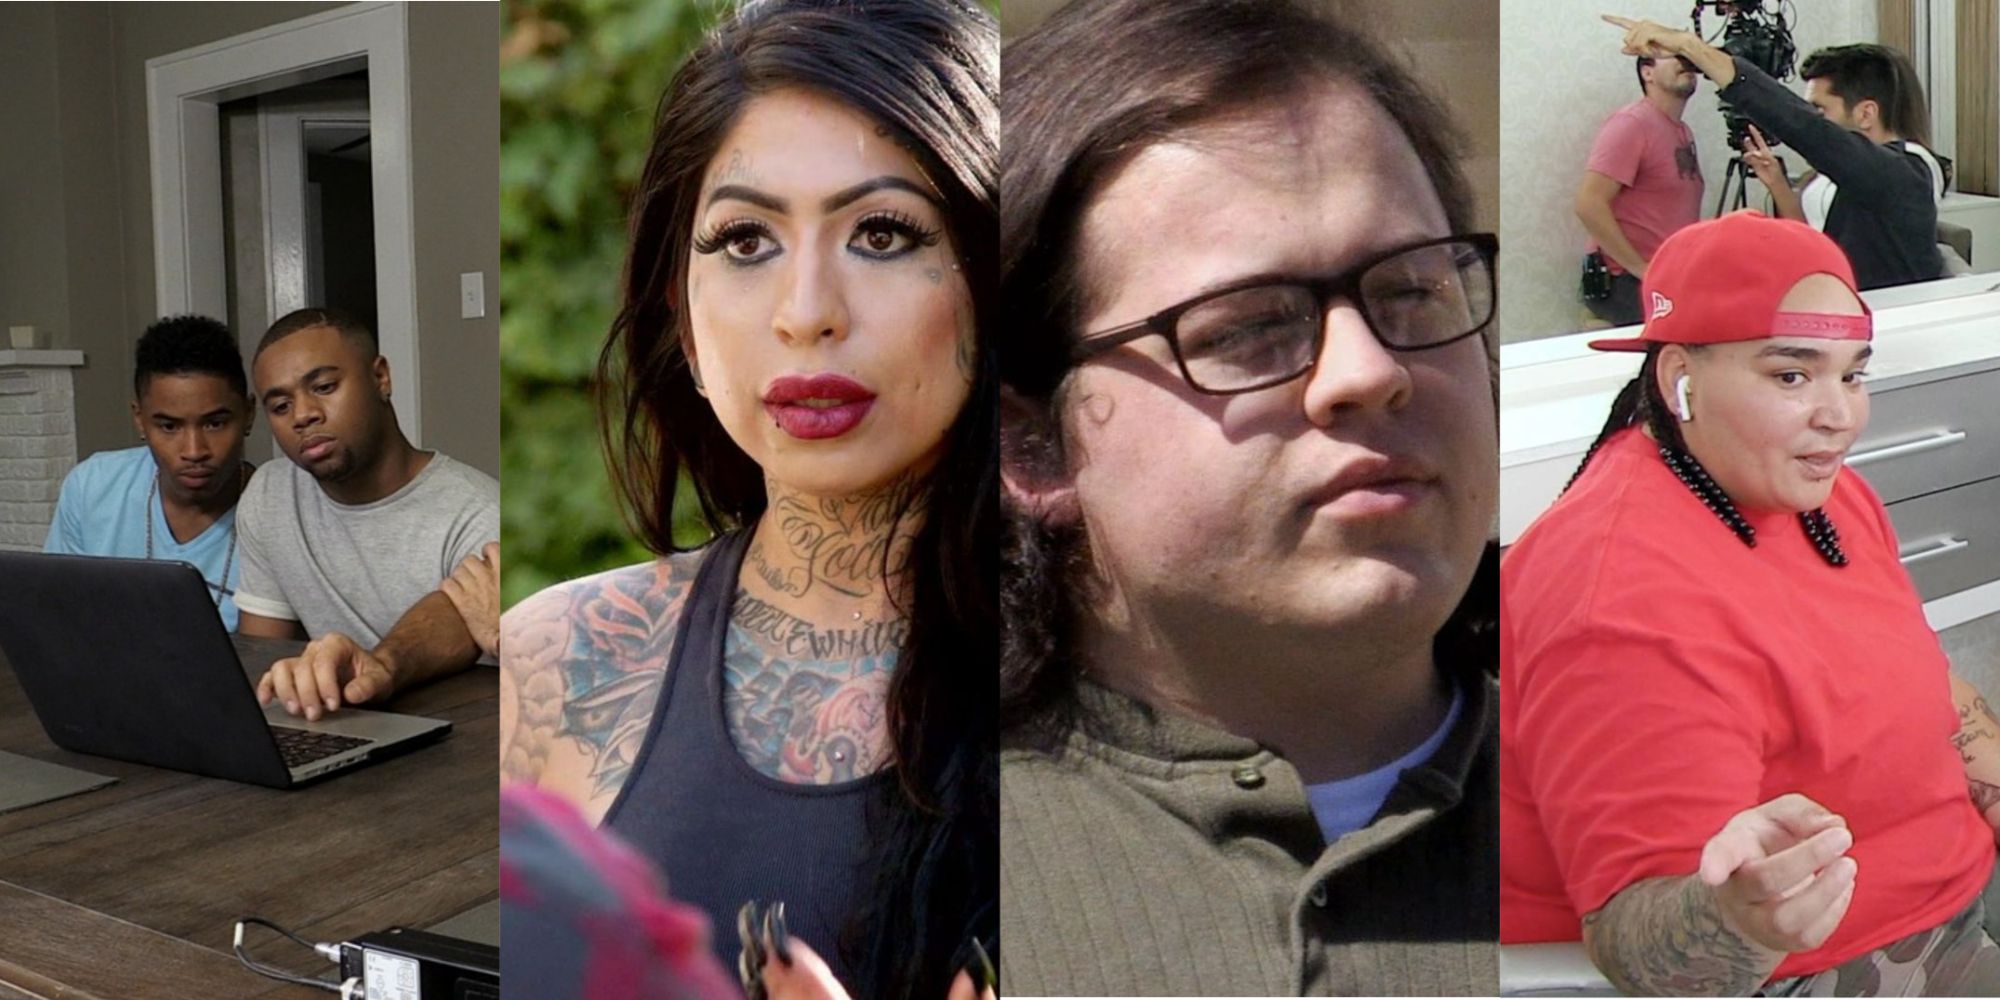 Split Image of Catfish victims during the reveals